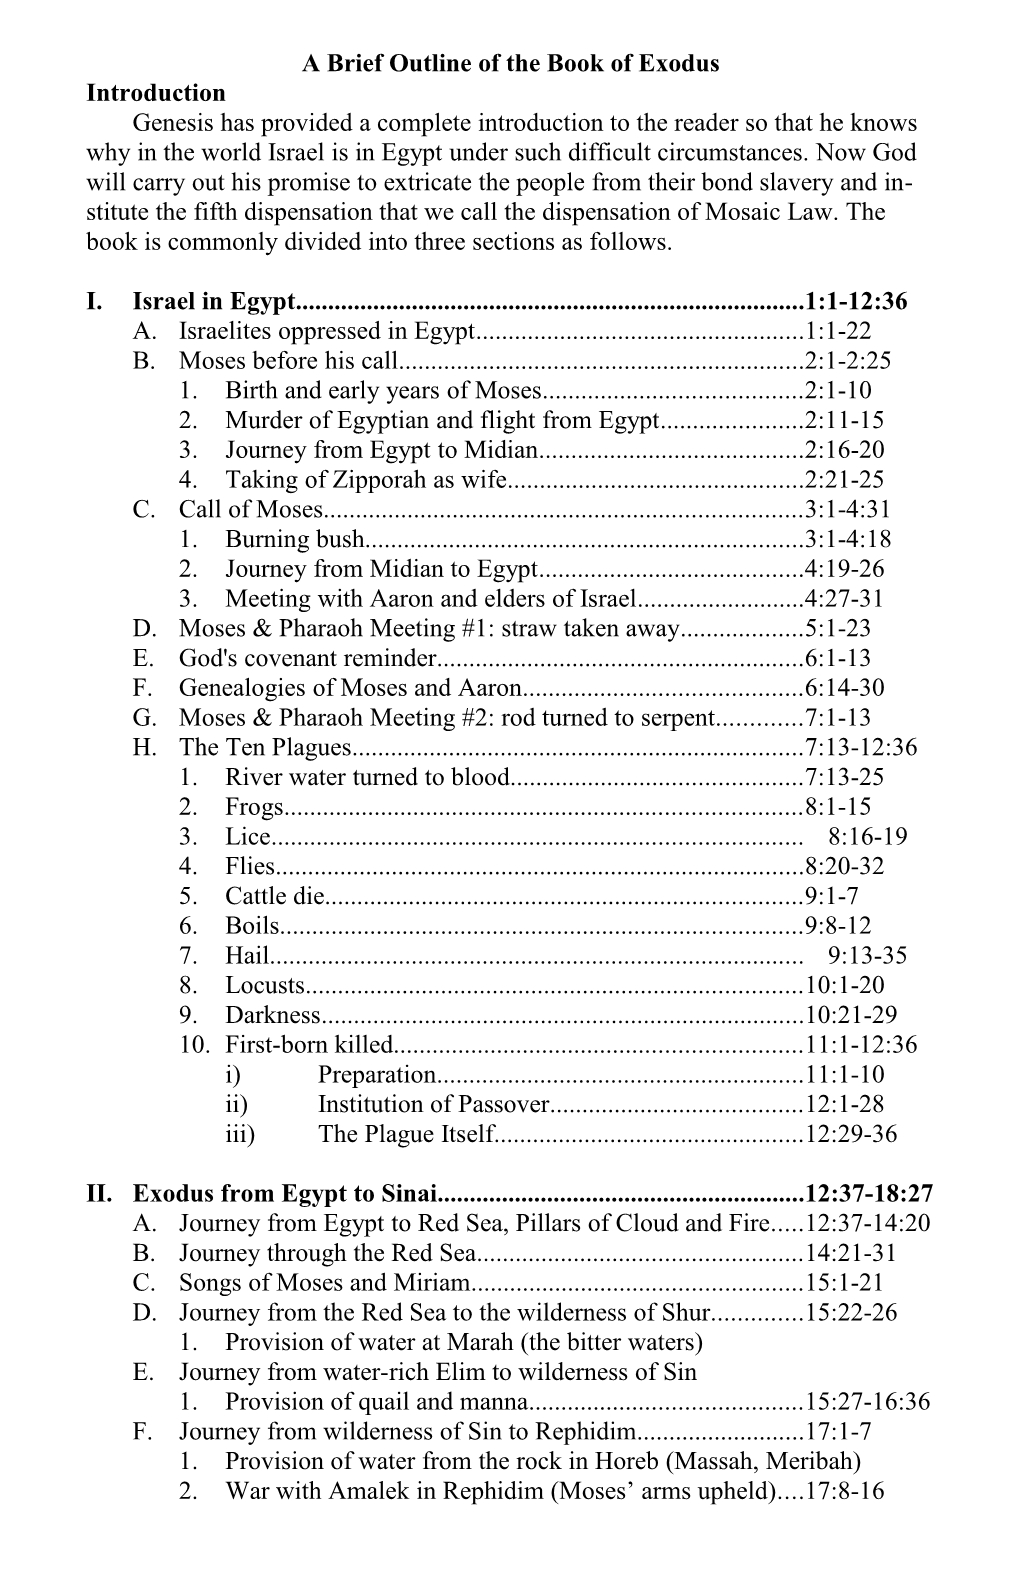 A Brief Outline of the Book of Exodus